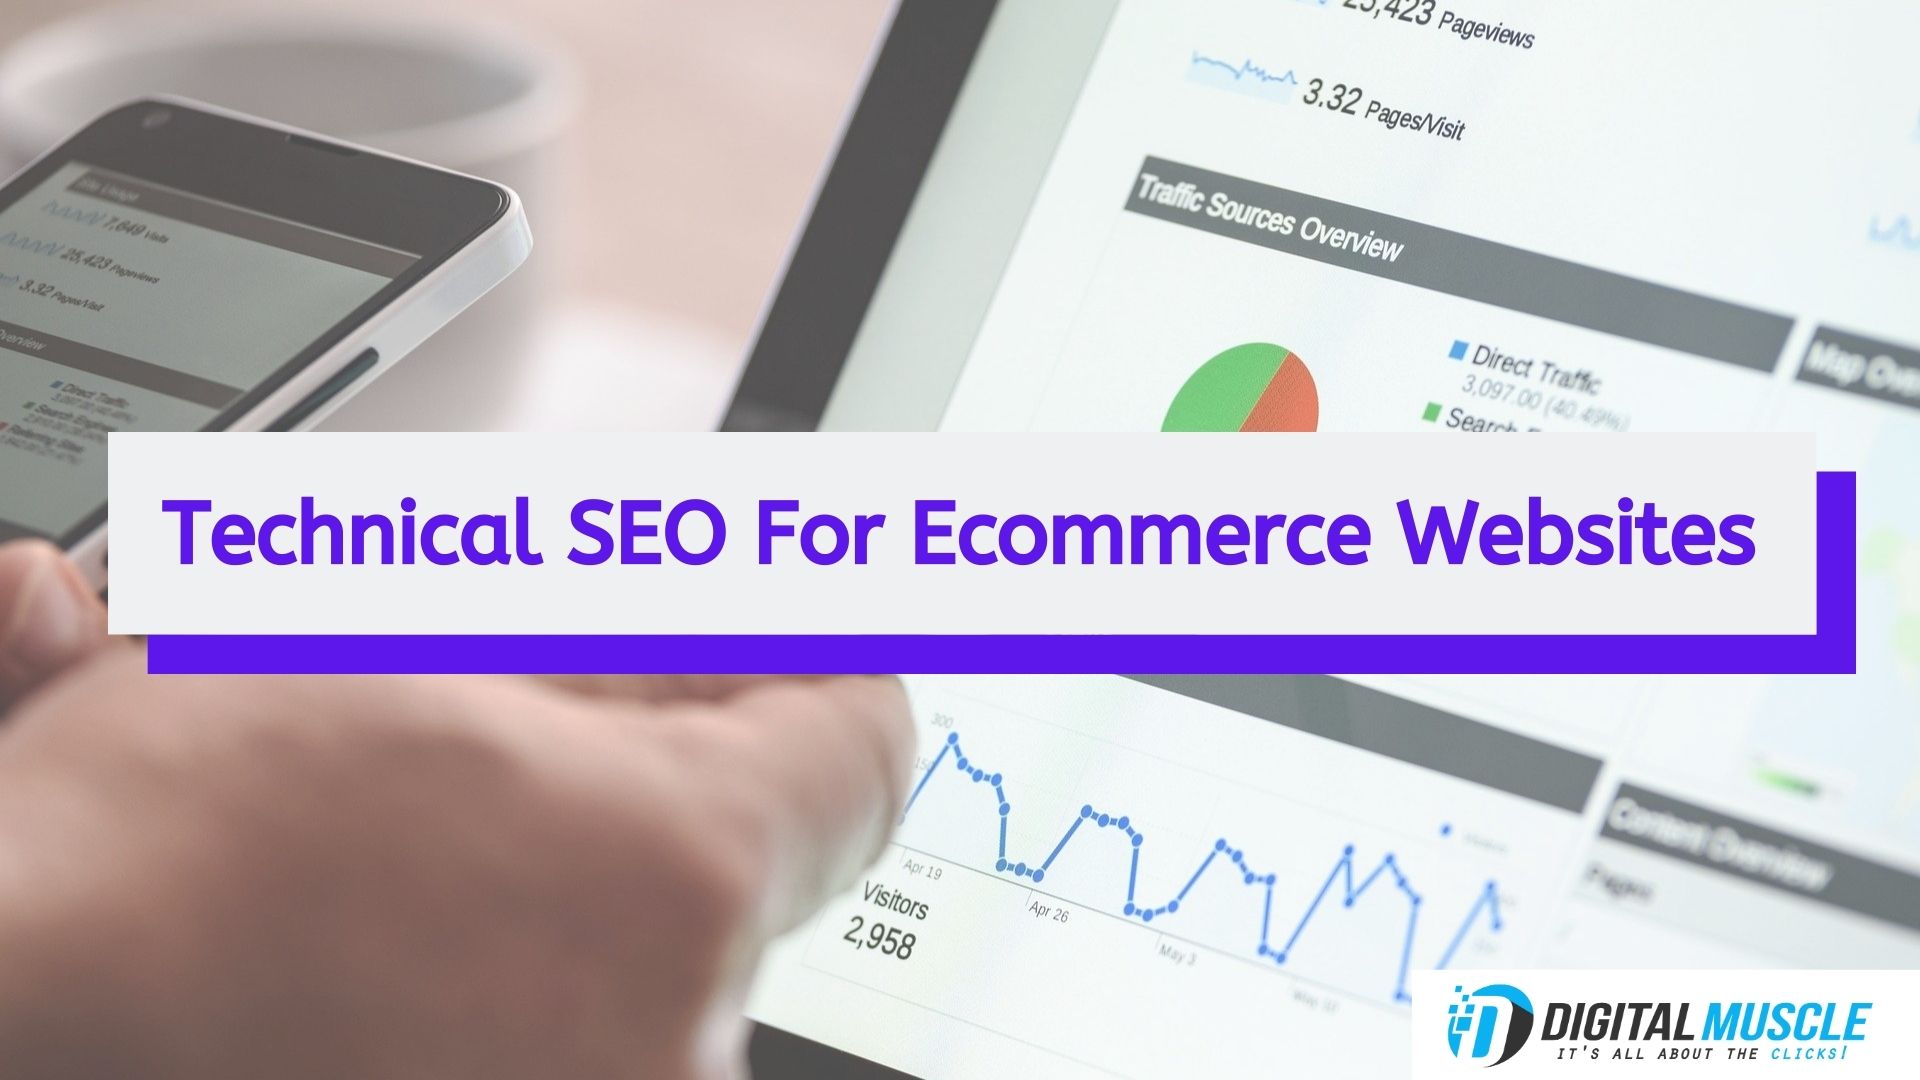 Technical SEO for eCommerce stores